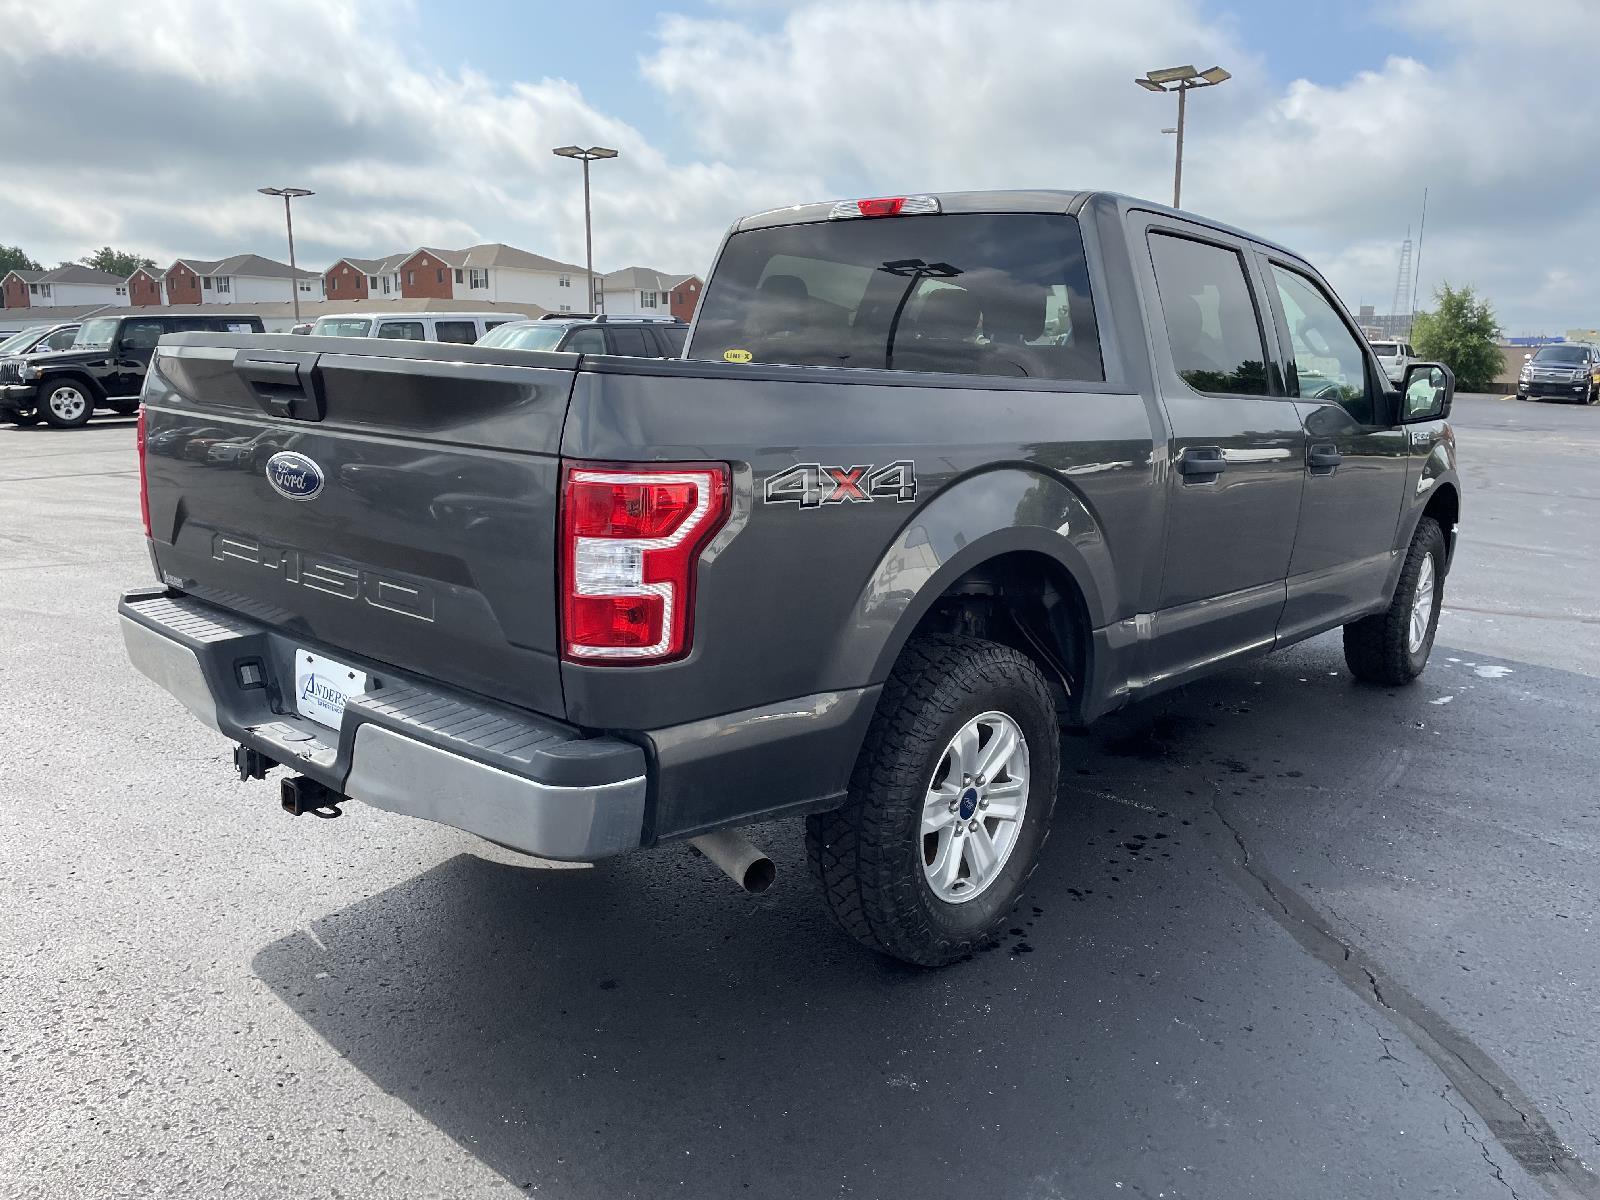 Used 2019 Ford F-150 XLT Crew Cab Truck for sale in St Joseph MO